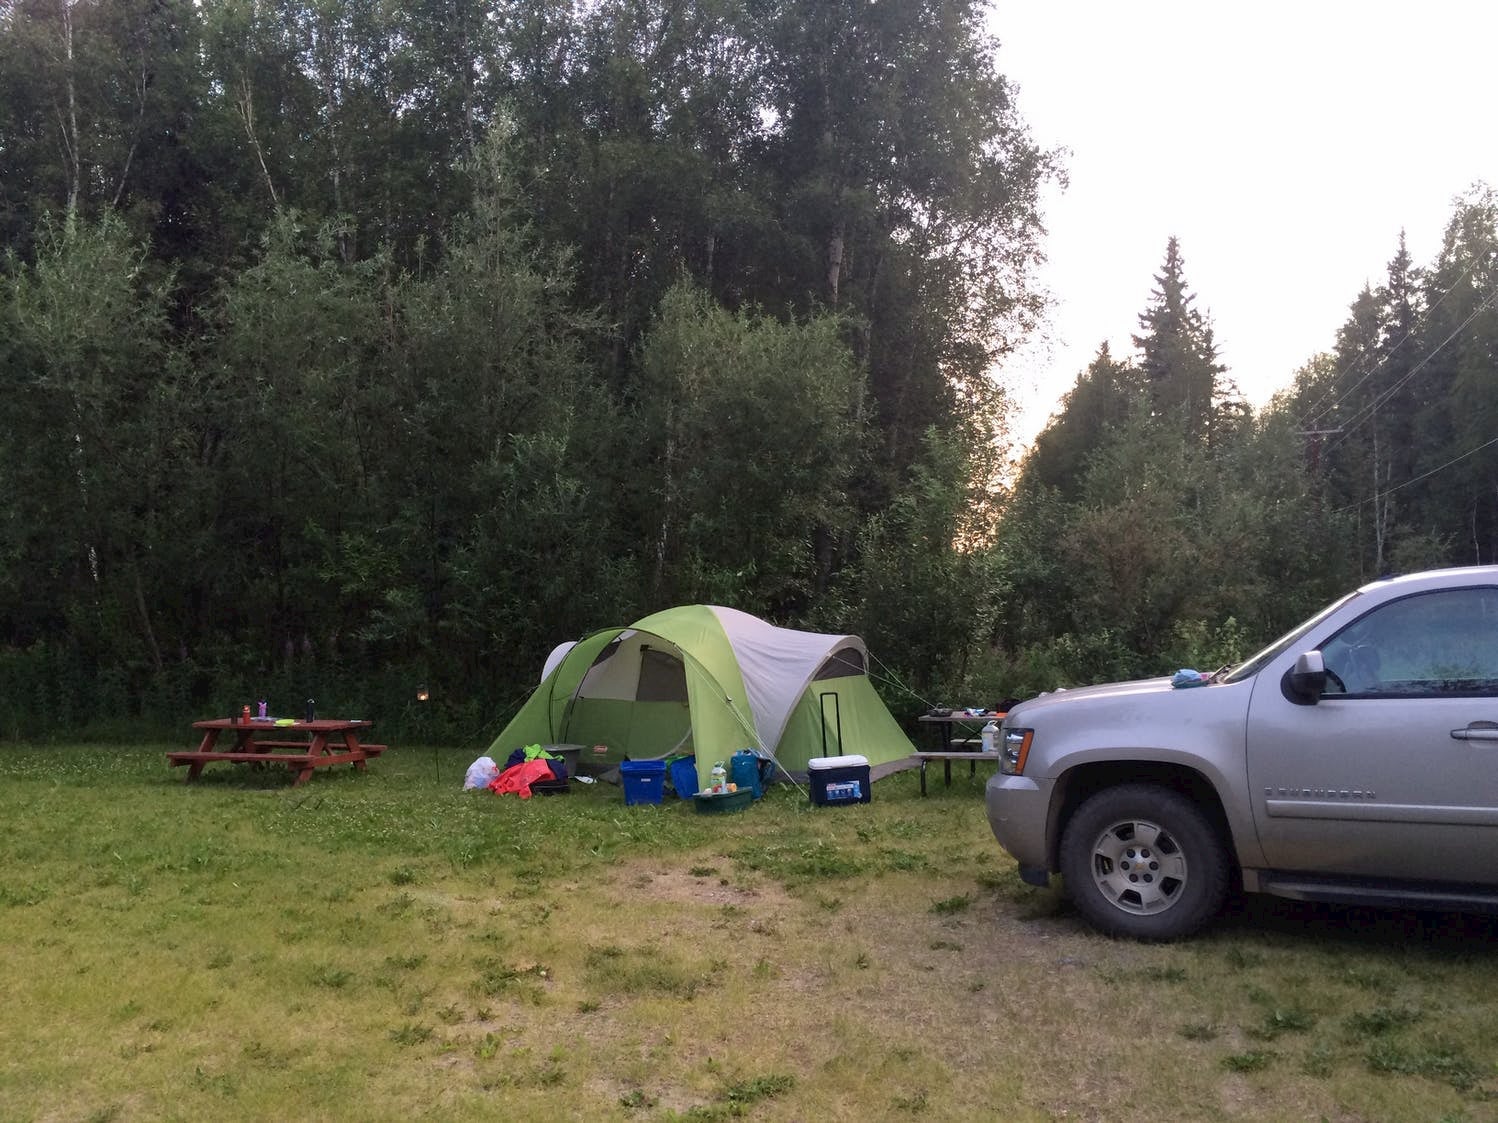 Campsite with pitched tent and fire pit beside the forest.